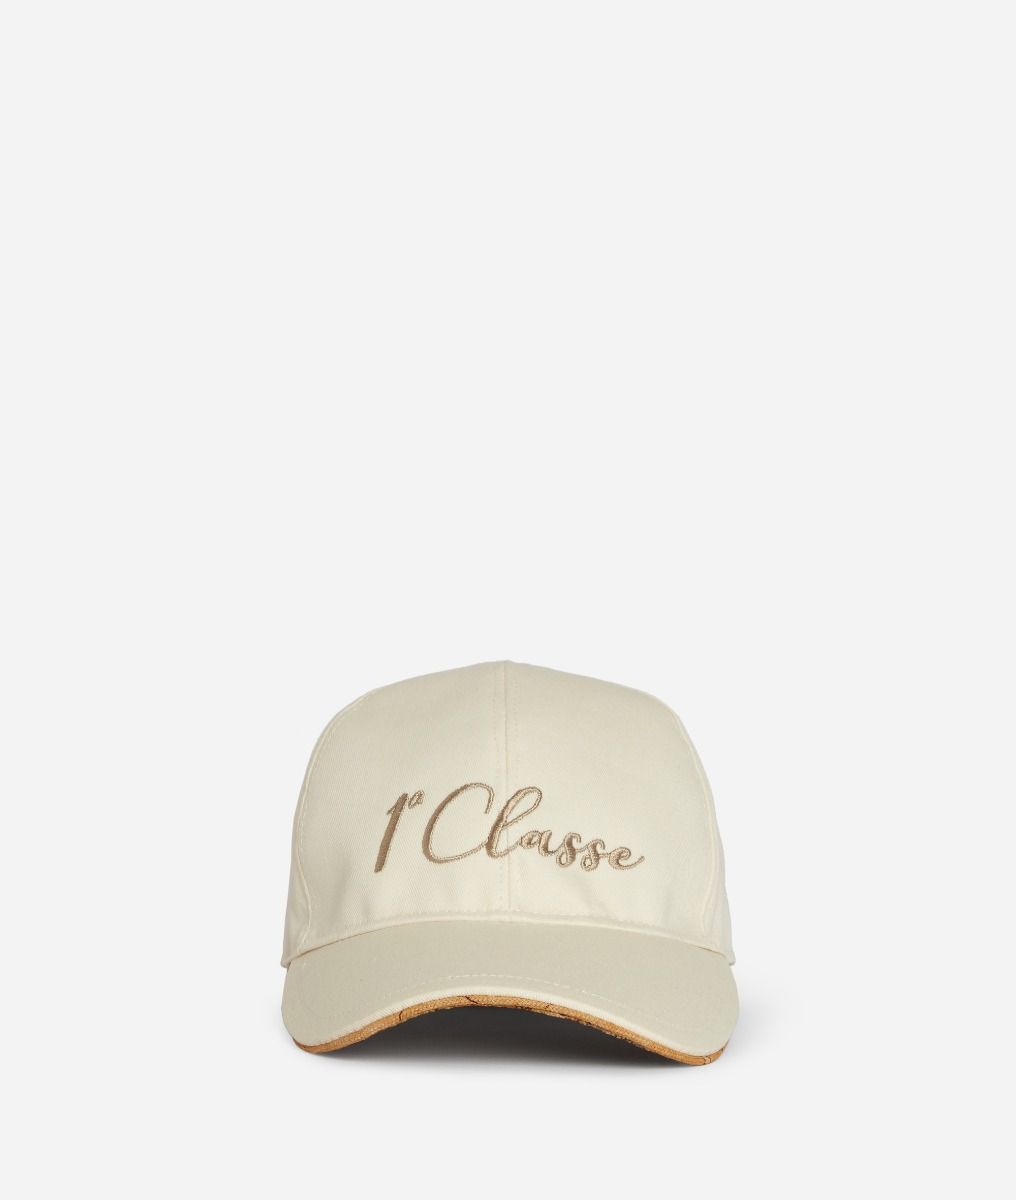 Geo Cruise Baseball Cap with 1A Classe embroidery Sand,front